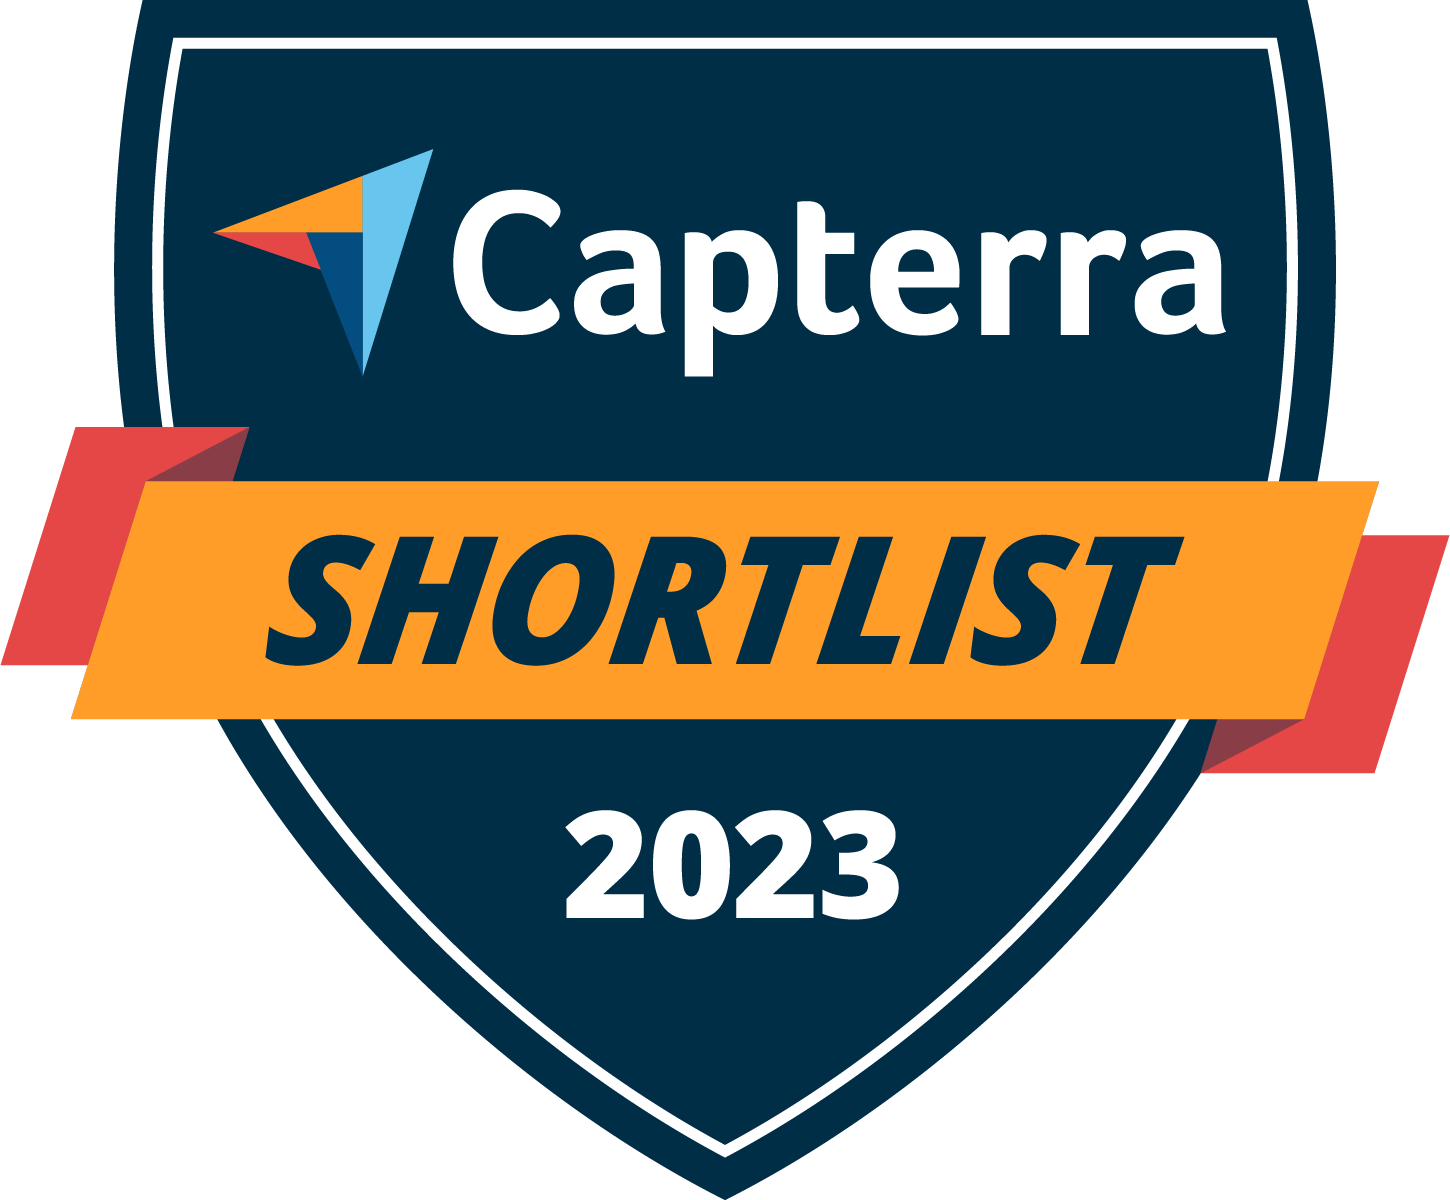 2023 capterra shortlist badge, featuring a shield shape with a blue background, accented by a red banner and a multicolored triangle at the top.